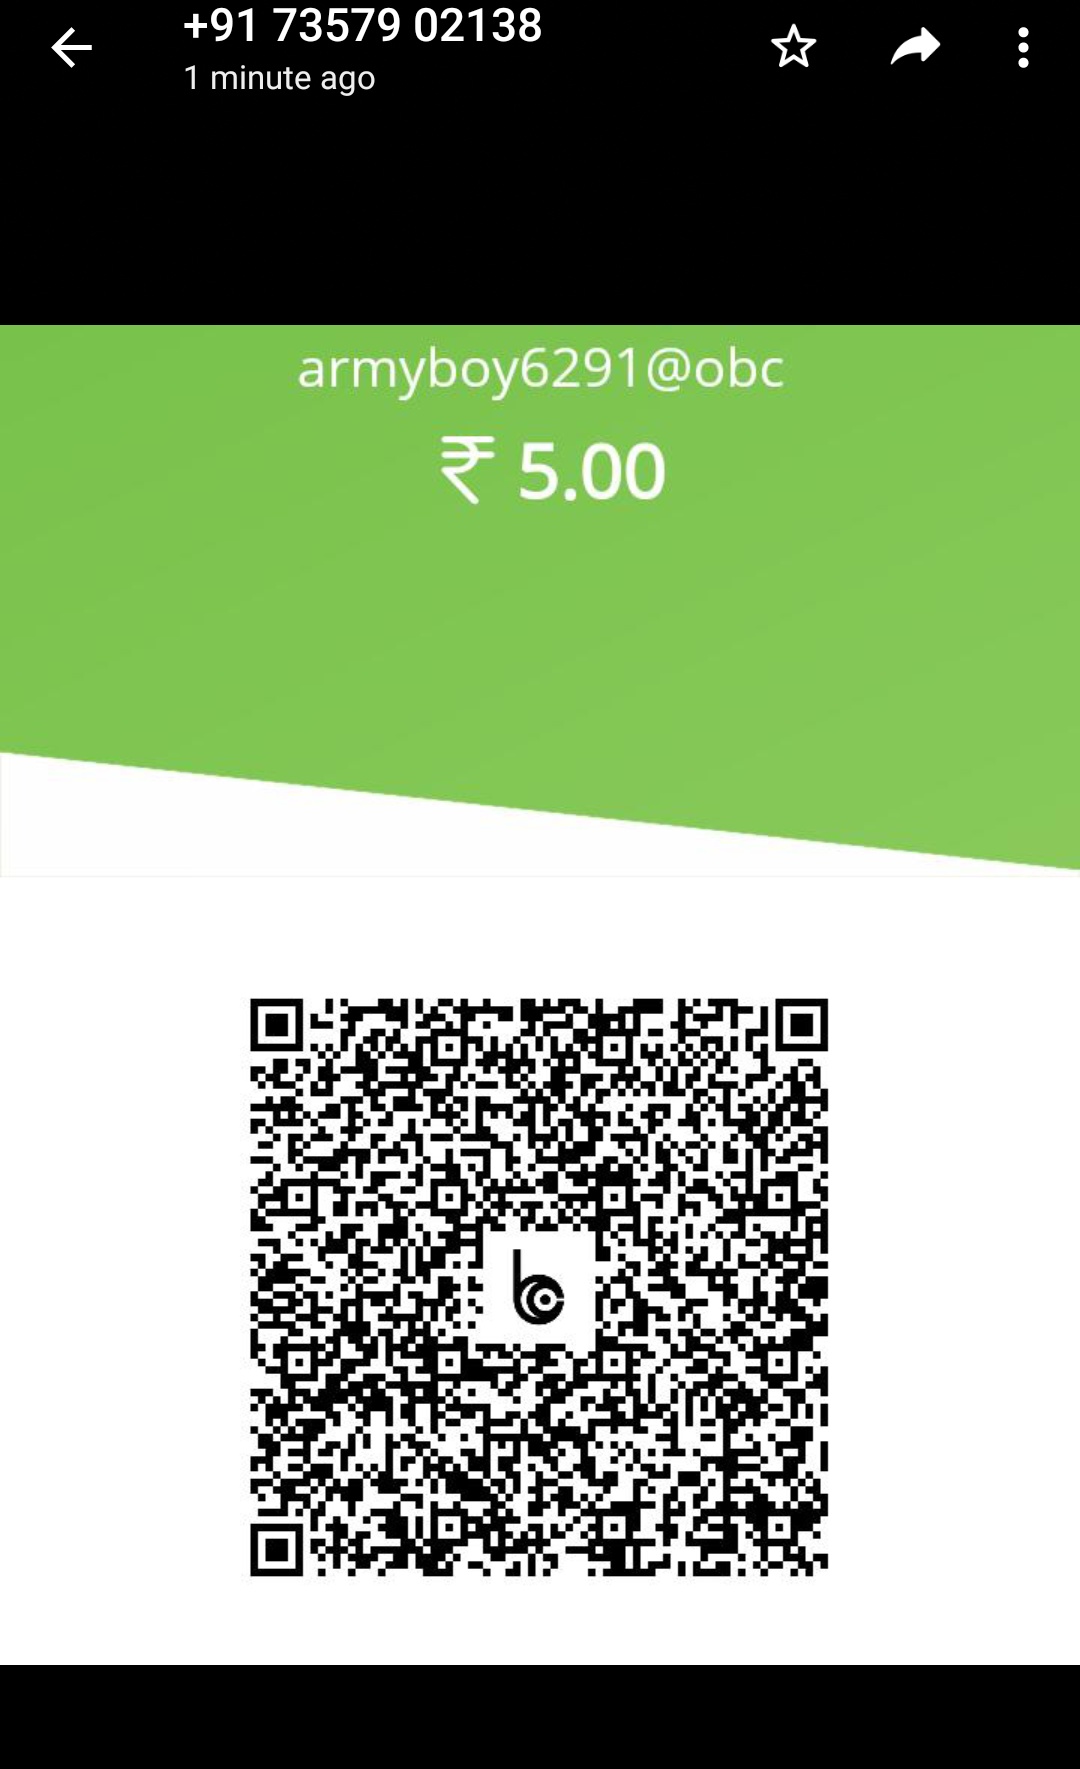 Akash Verma on X: @DelhiPolice fraud call received through OLX. @OLX_India  This man was asking to scan the below QR code and trying me to send money  from my account. The call